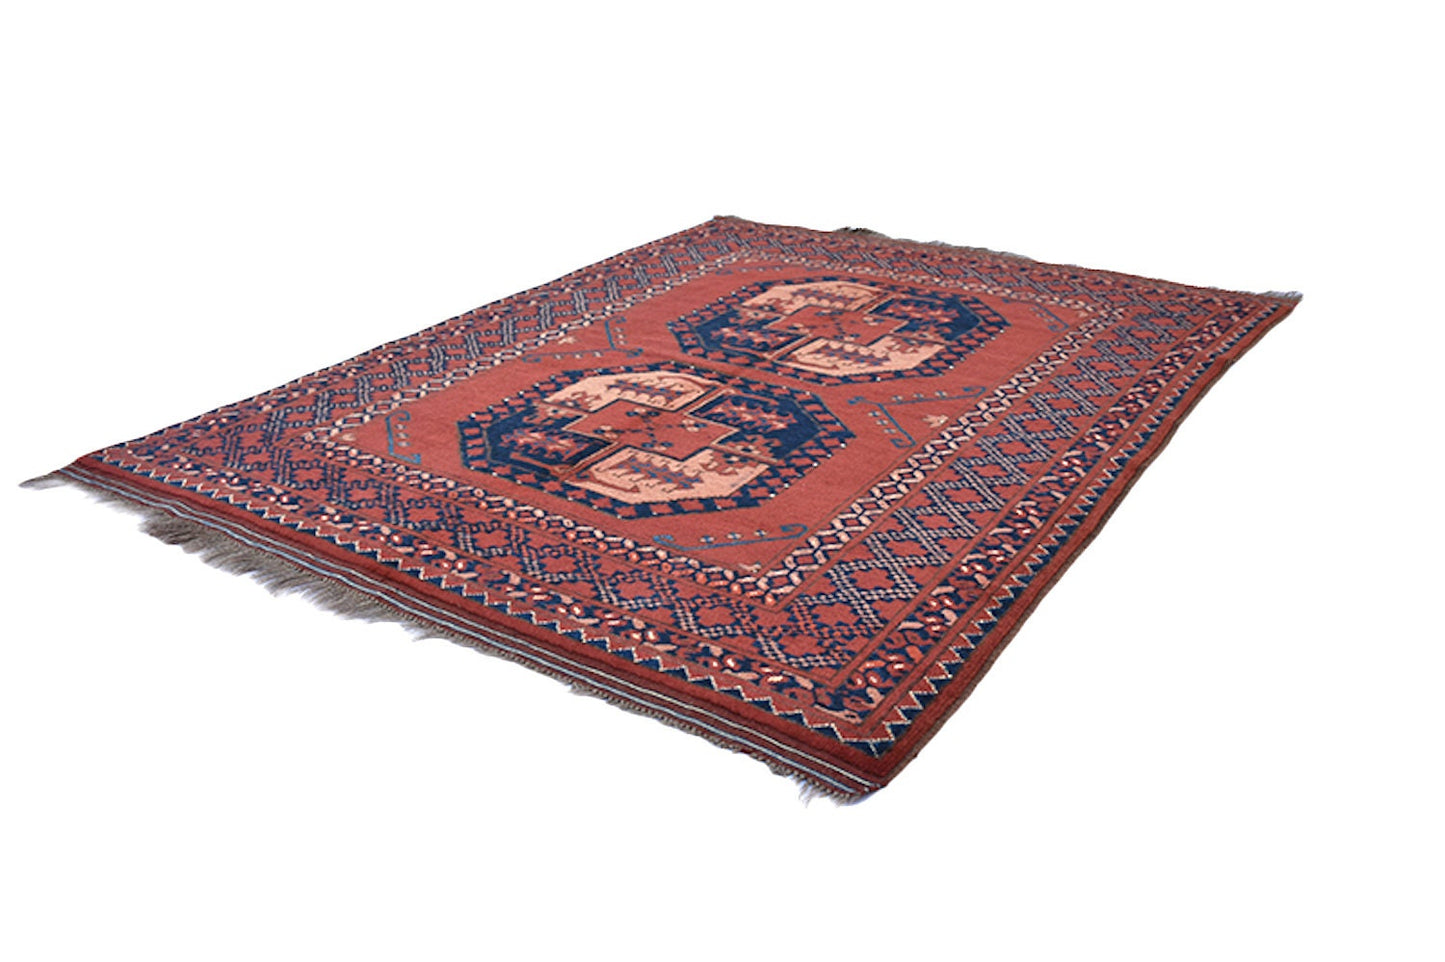 Antique Red Orange Vintage 4x5 Rug | Geometric Medallion Rug | Afghan Persian Wool Rug | One of a Kind Wool Hand Knotted